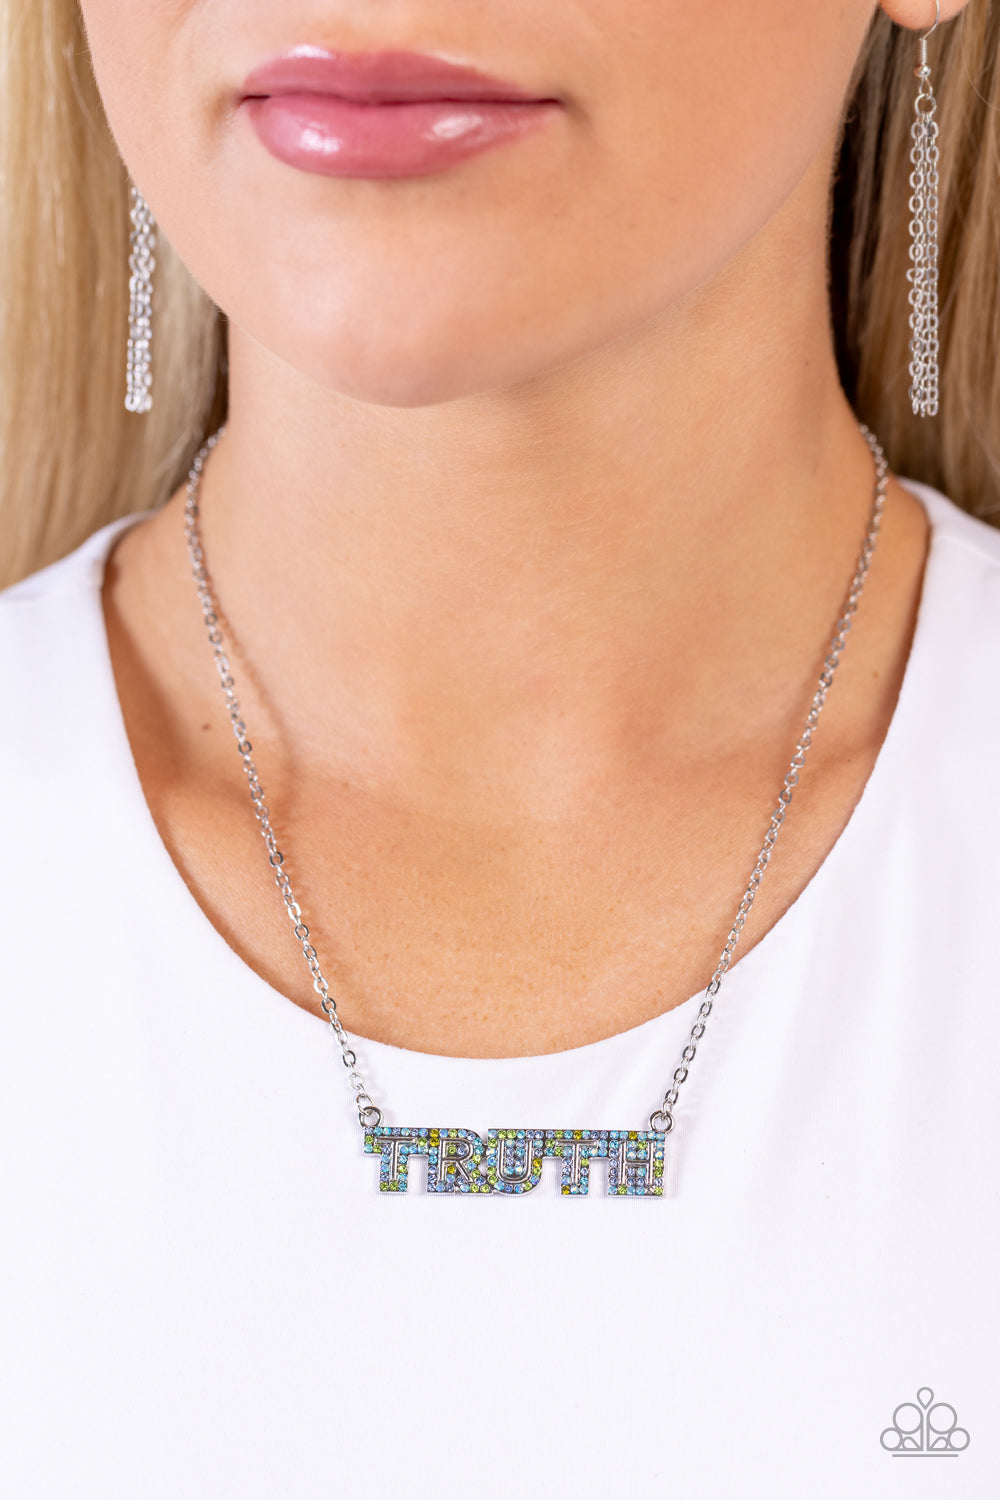 Paparazzi Accessories - Truth Trinket - Blue Necklaces encrusted in glassy olive, Montana, aquamarine, and blue iridescent rhinestones, the silver word "TRUTH" connects to a dainty silver chain, creating an inspirational pendant below the collar. Features an adjustable clasp closure. Due to its prismatic palette, color may vary.  Sold as one individual necklace. Includes one pair of matching earrings.